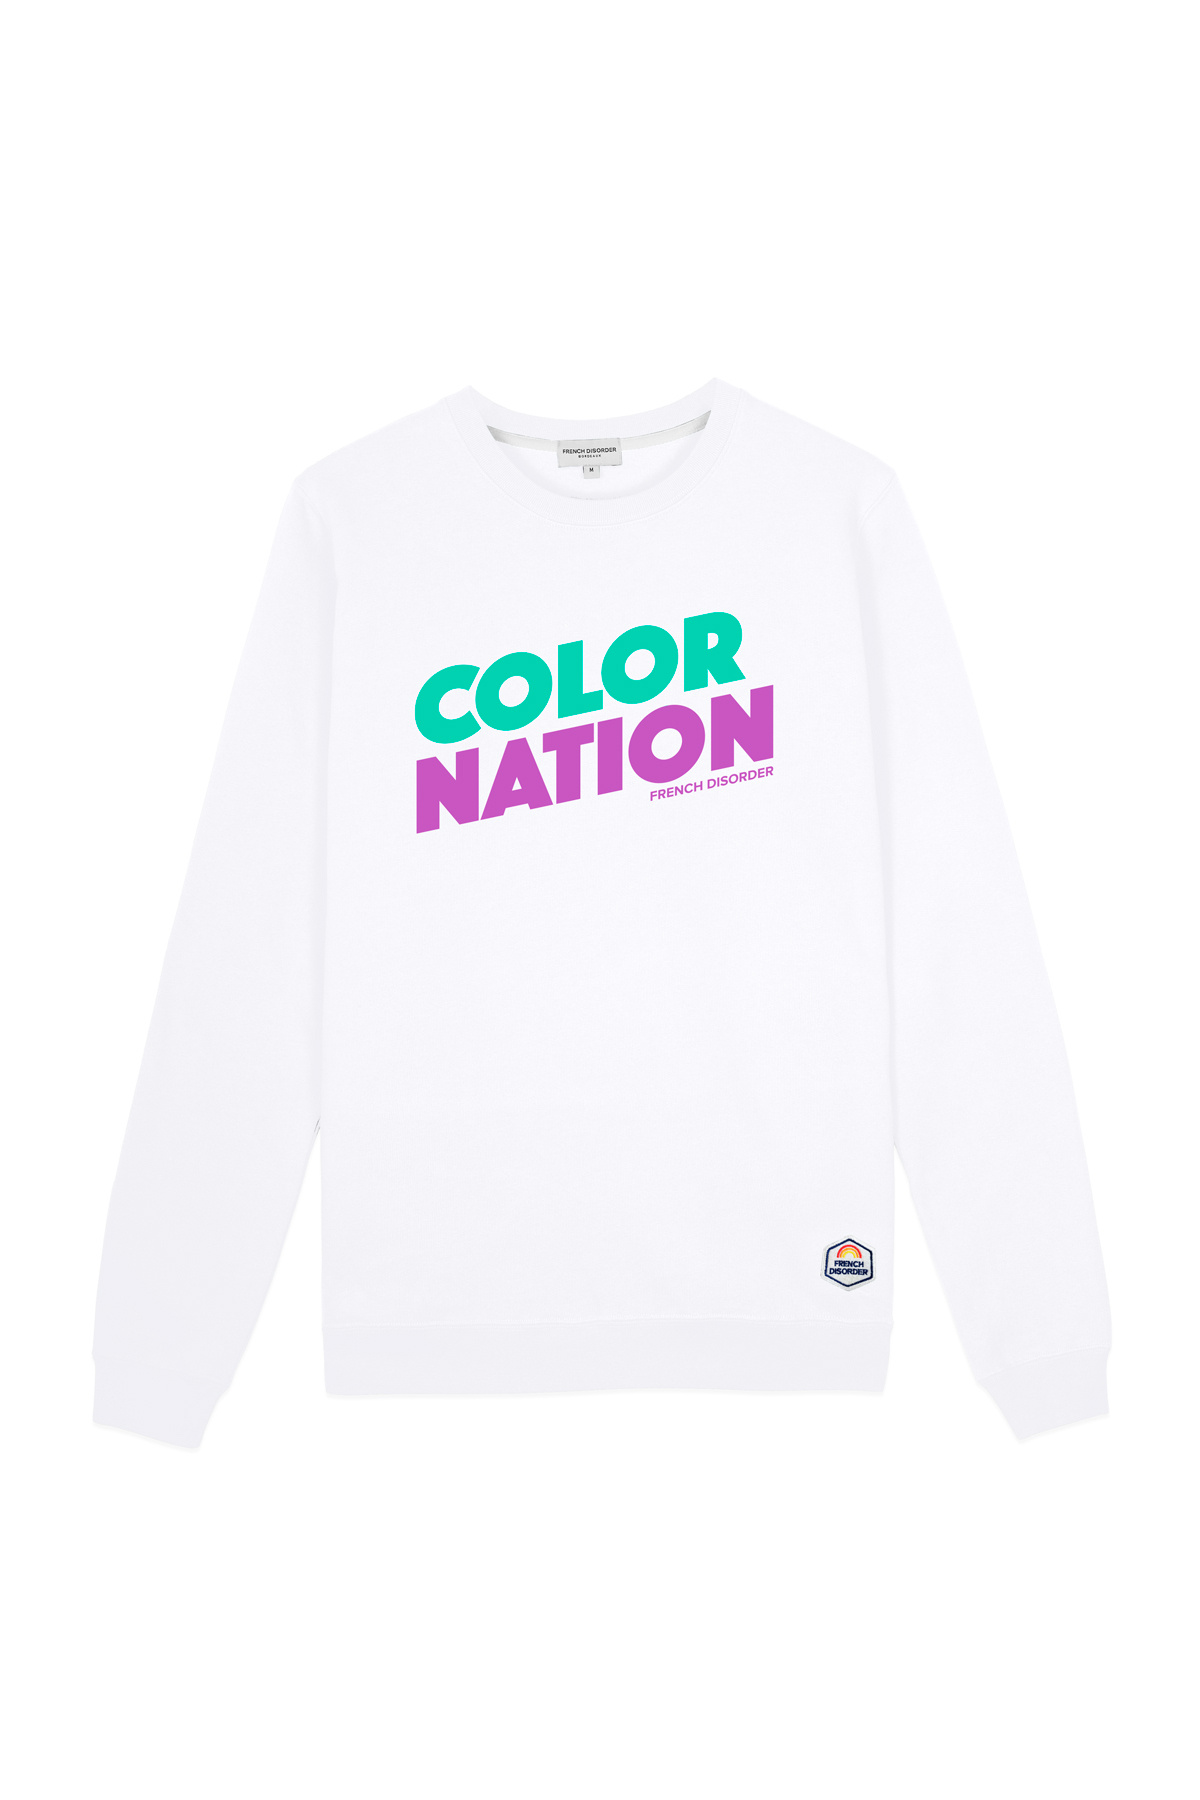 Sweat COLOR NATION